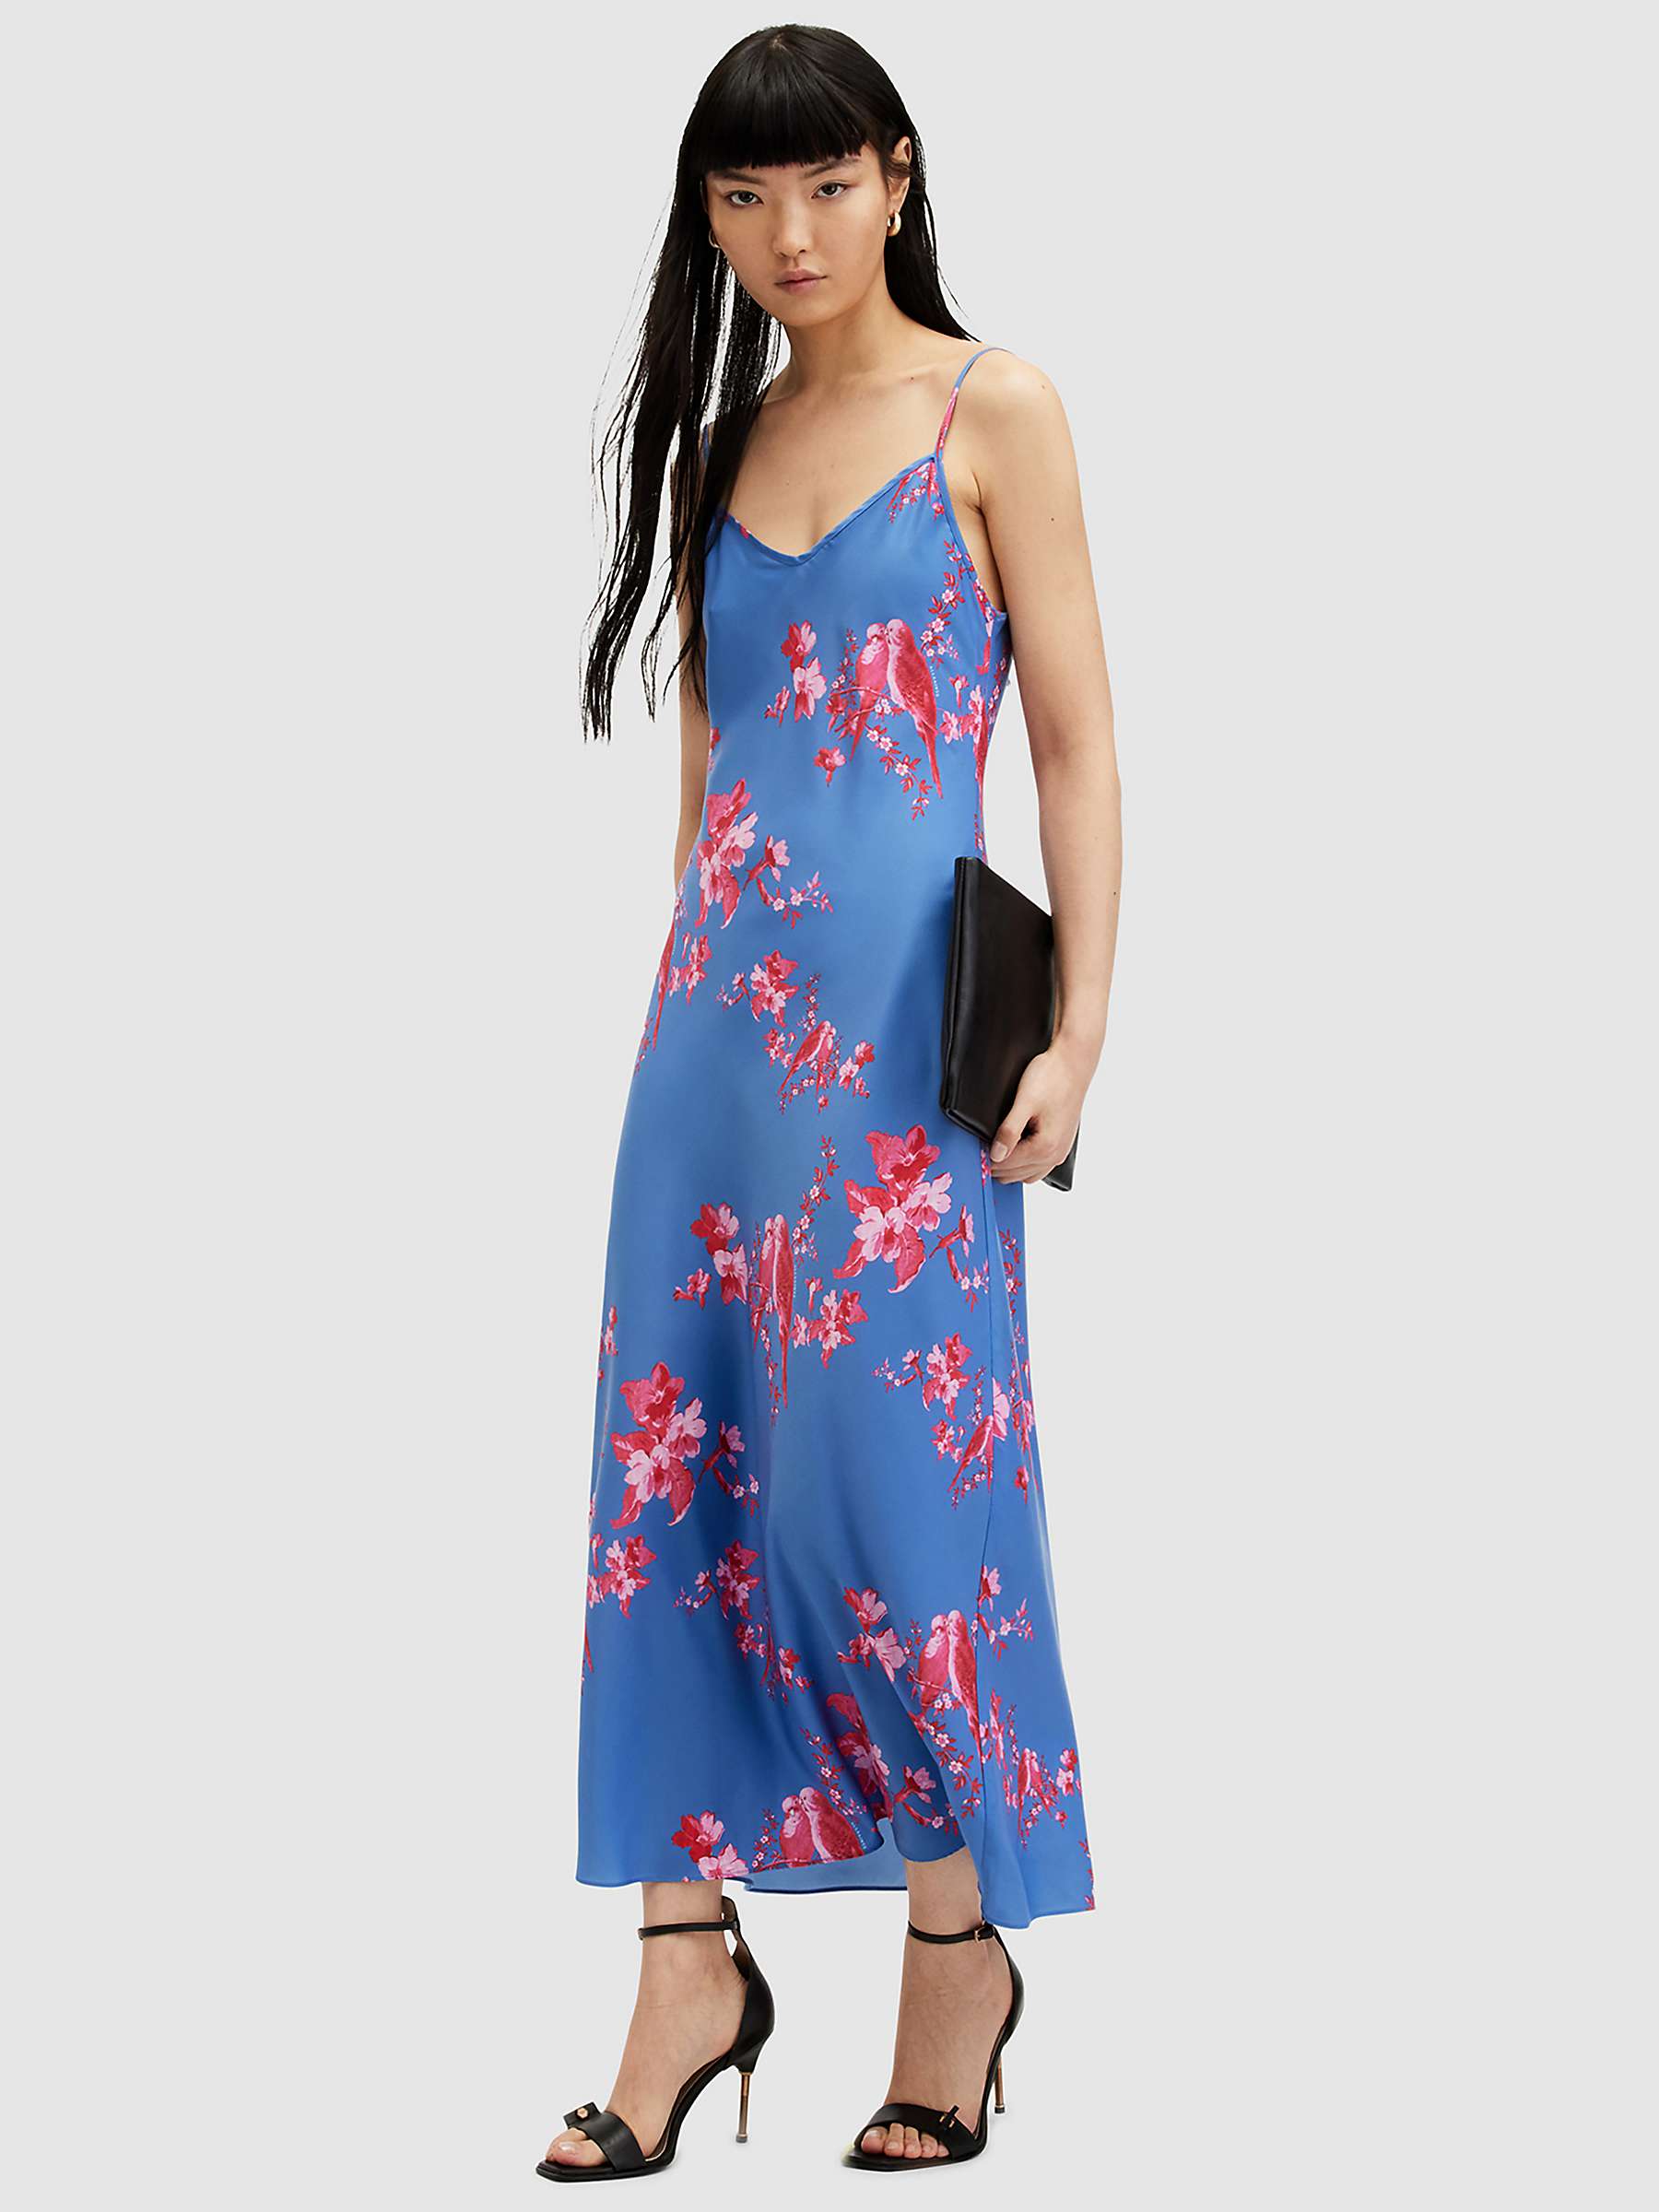 Buy AllSaints Bryony Iona Floral Midi Dress, Neon Pink/Blue Online at johnlewis.com